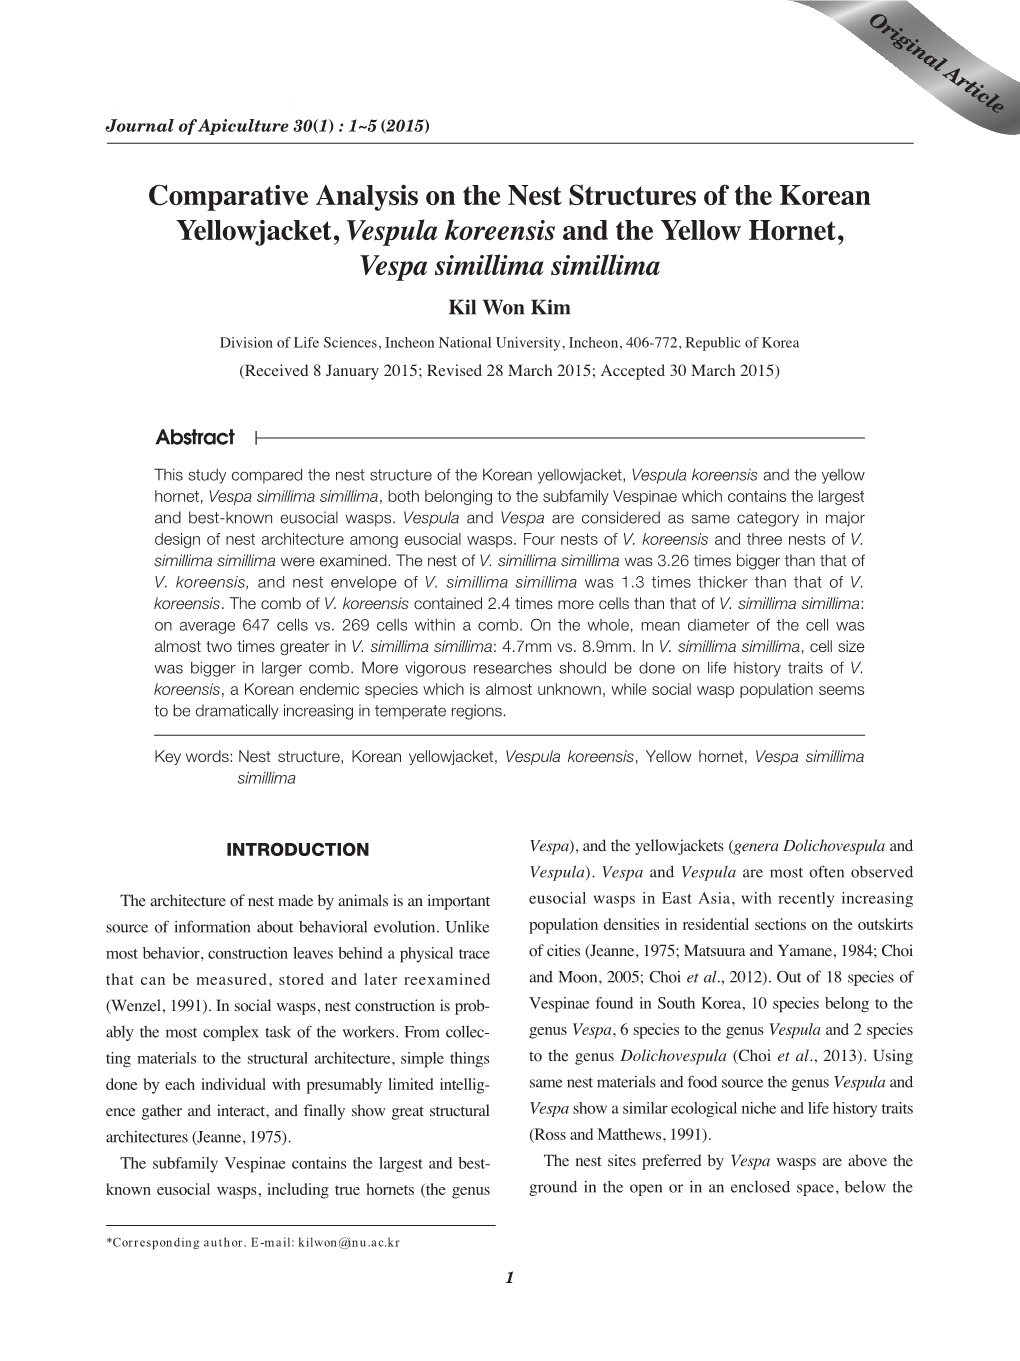 Comparative Analysis on the Nest Structures of the Korean Yellowjacket, Vespula Koreensis and the Yellow Hornet, Vespa Simillima Simillima Kil Won Kim